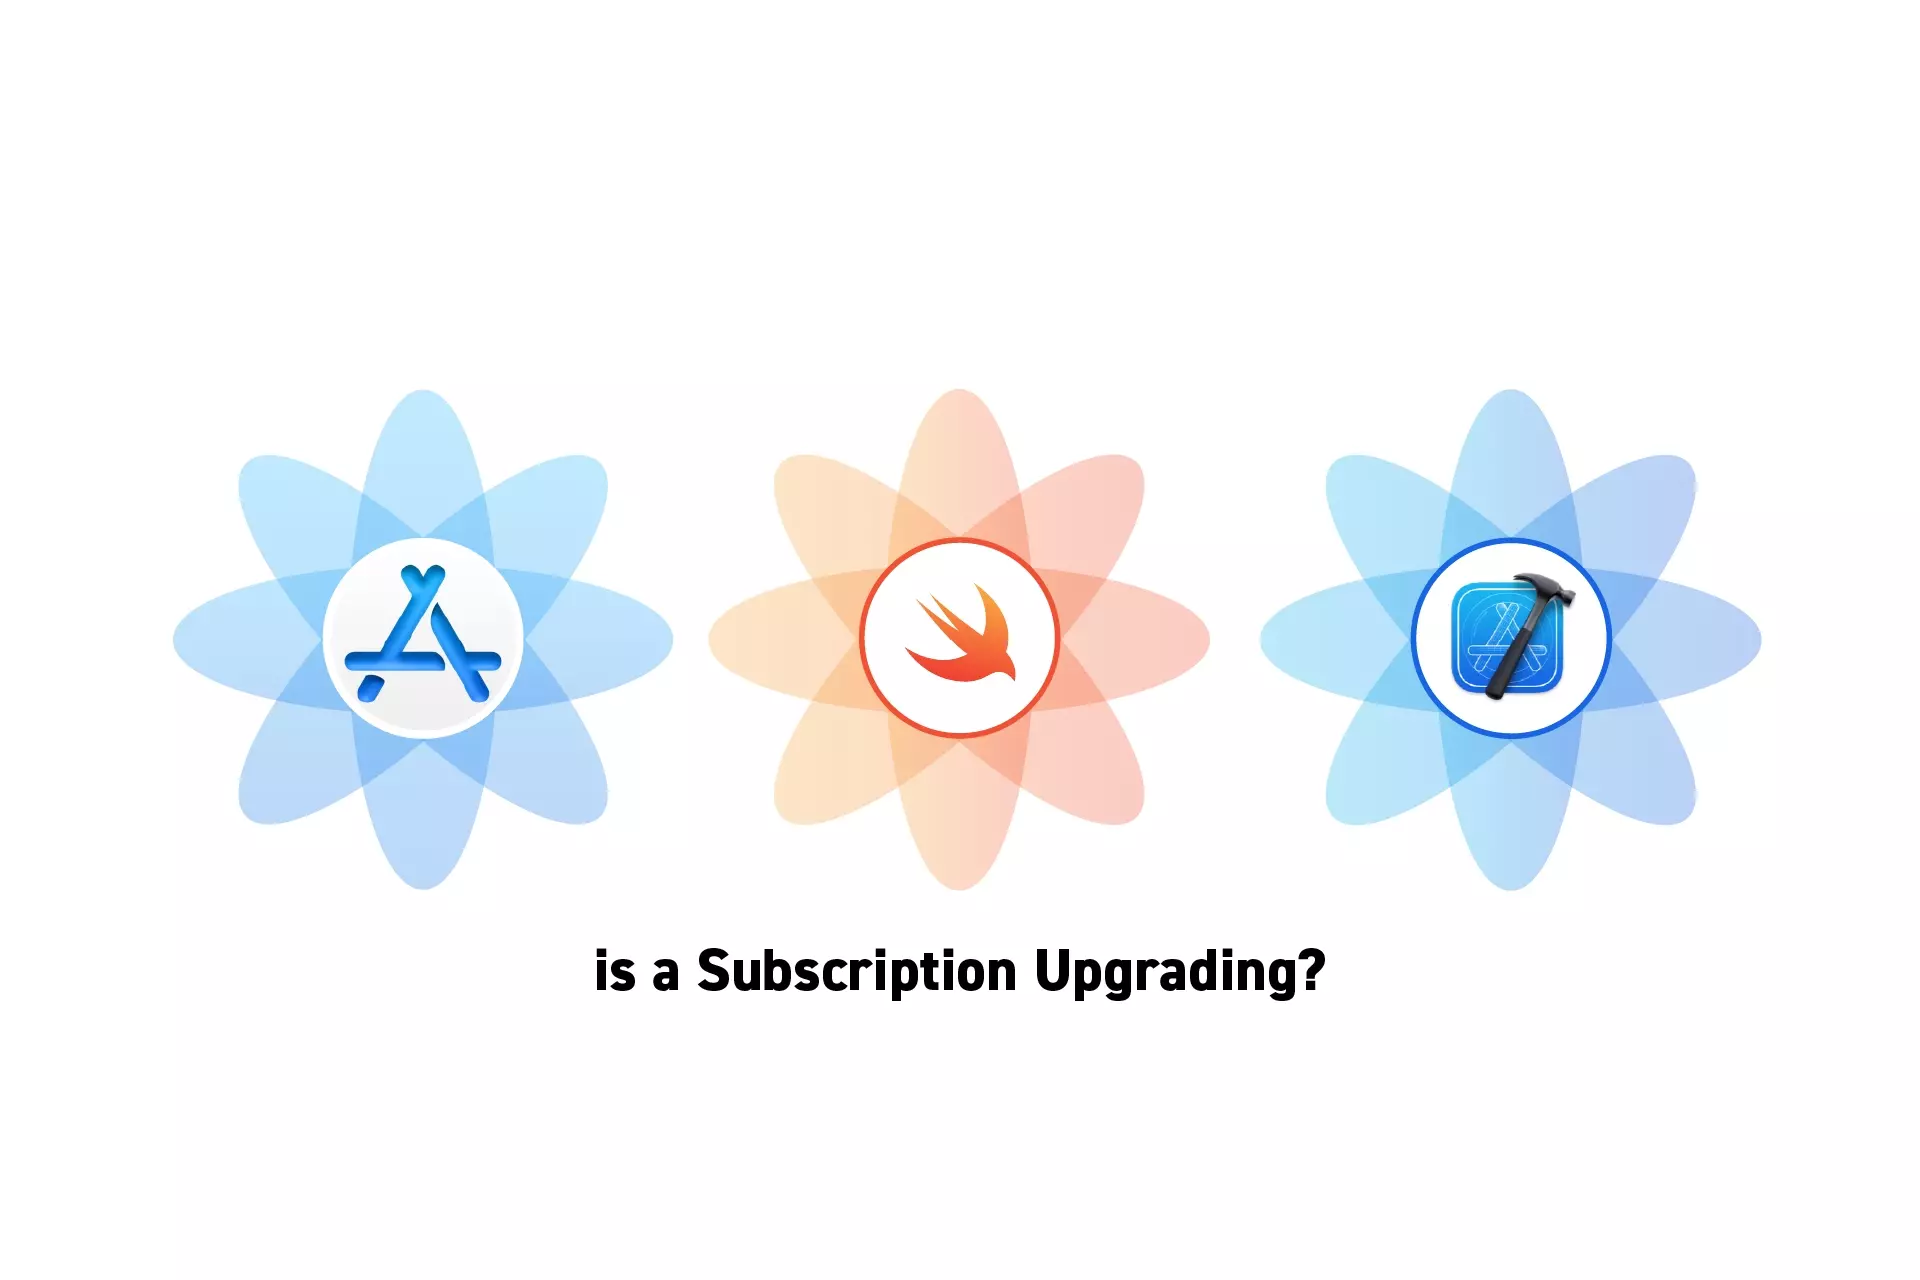 Three flowers that represent StoreKit, Swift and XCode side by side. Beneath them sits the text “is a Subscription Upgrading?.”